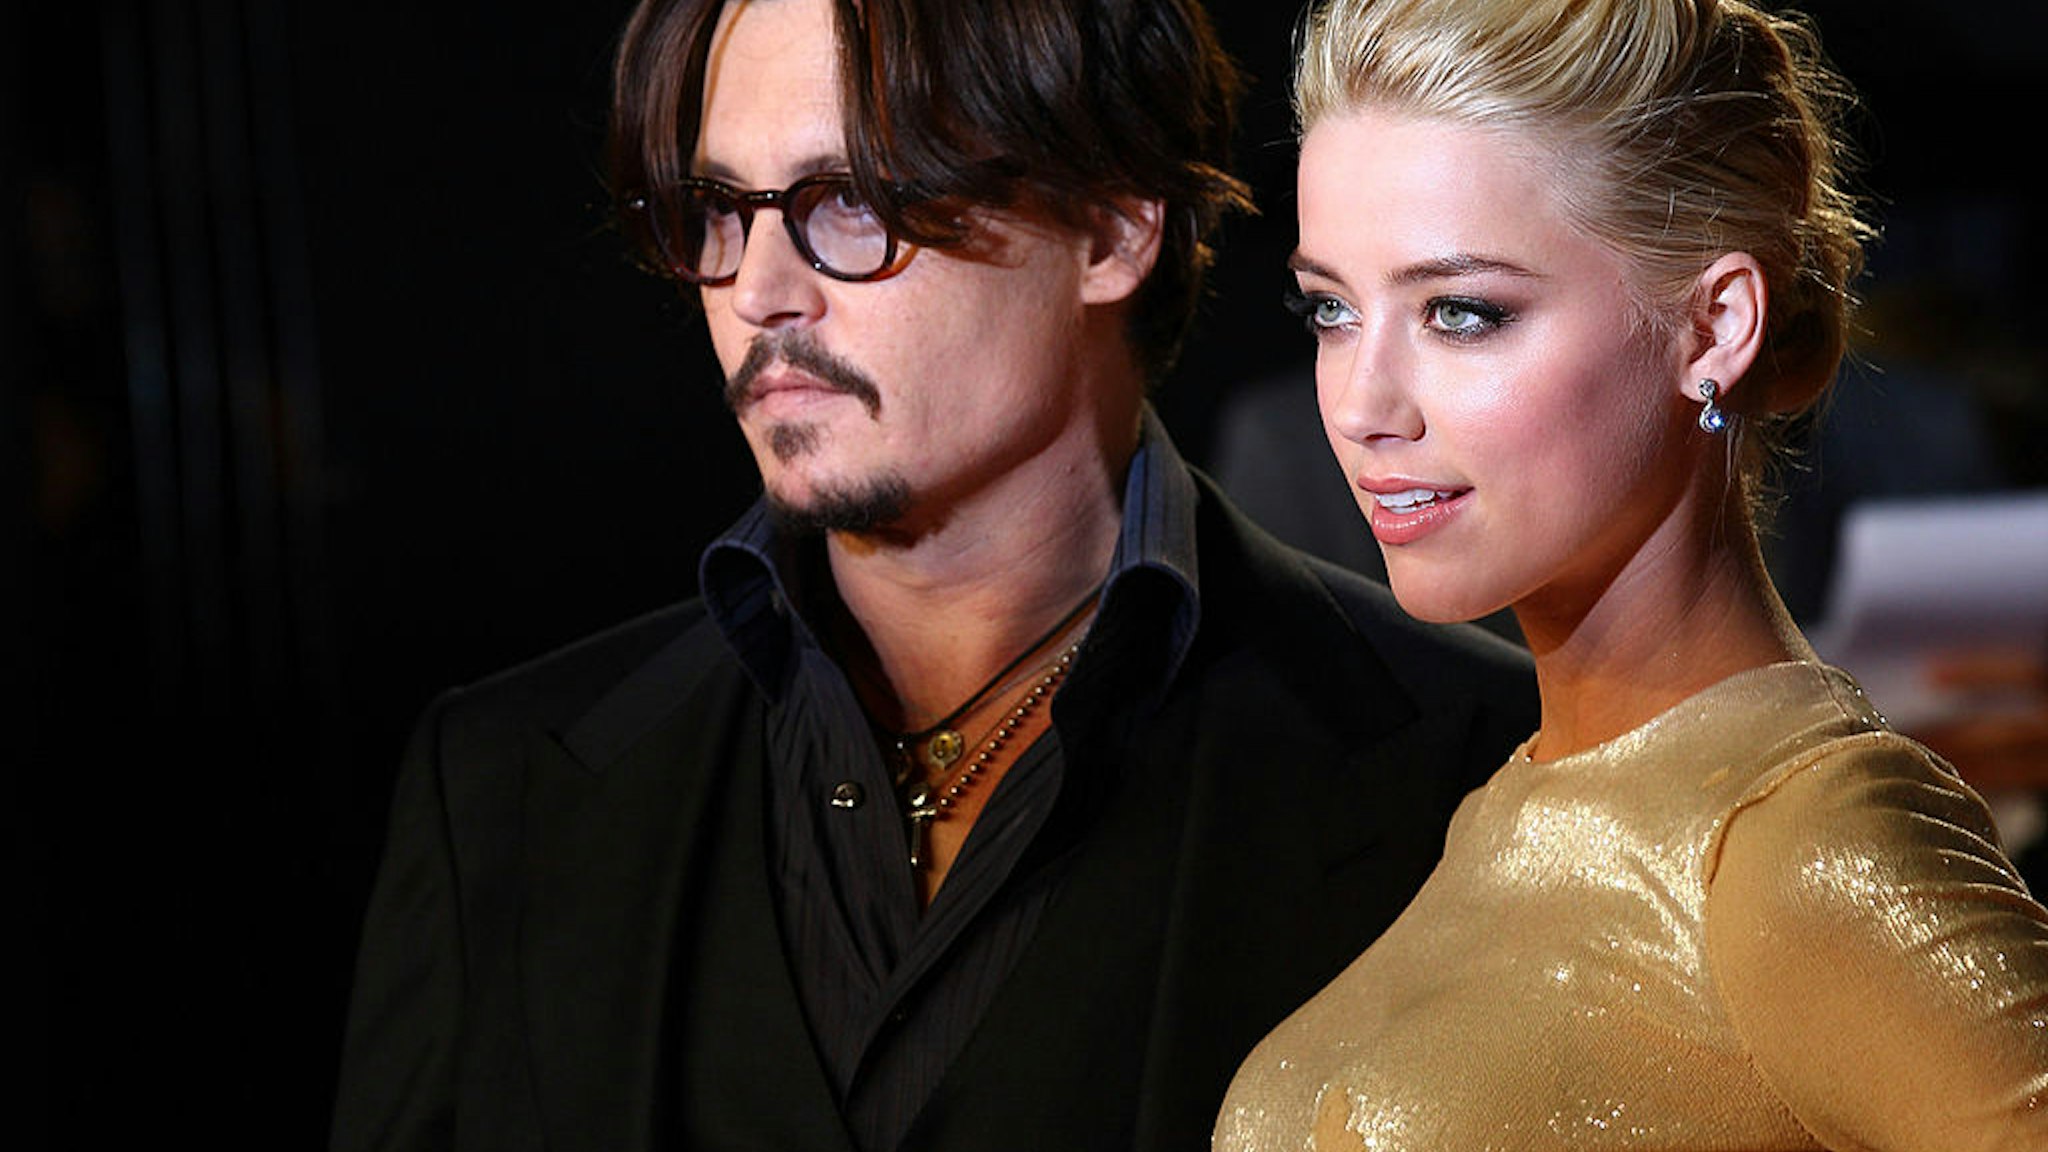 Johnny Depp and Amber Heard attend the European Premiere of 'The Rum Diary' at Odean, Kensington on November 3, 2011 in London, England.